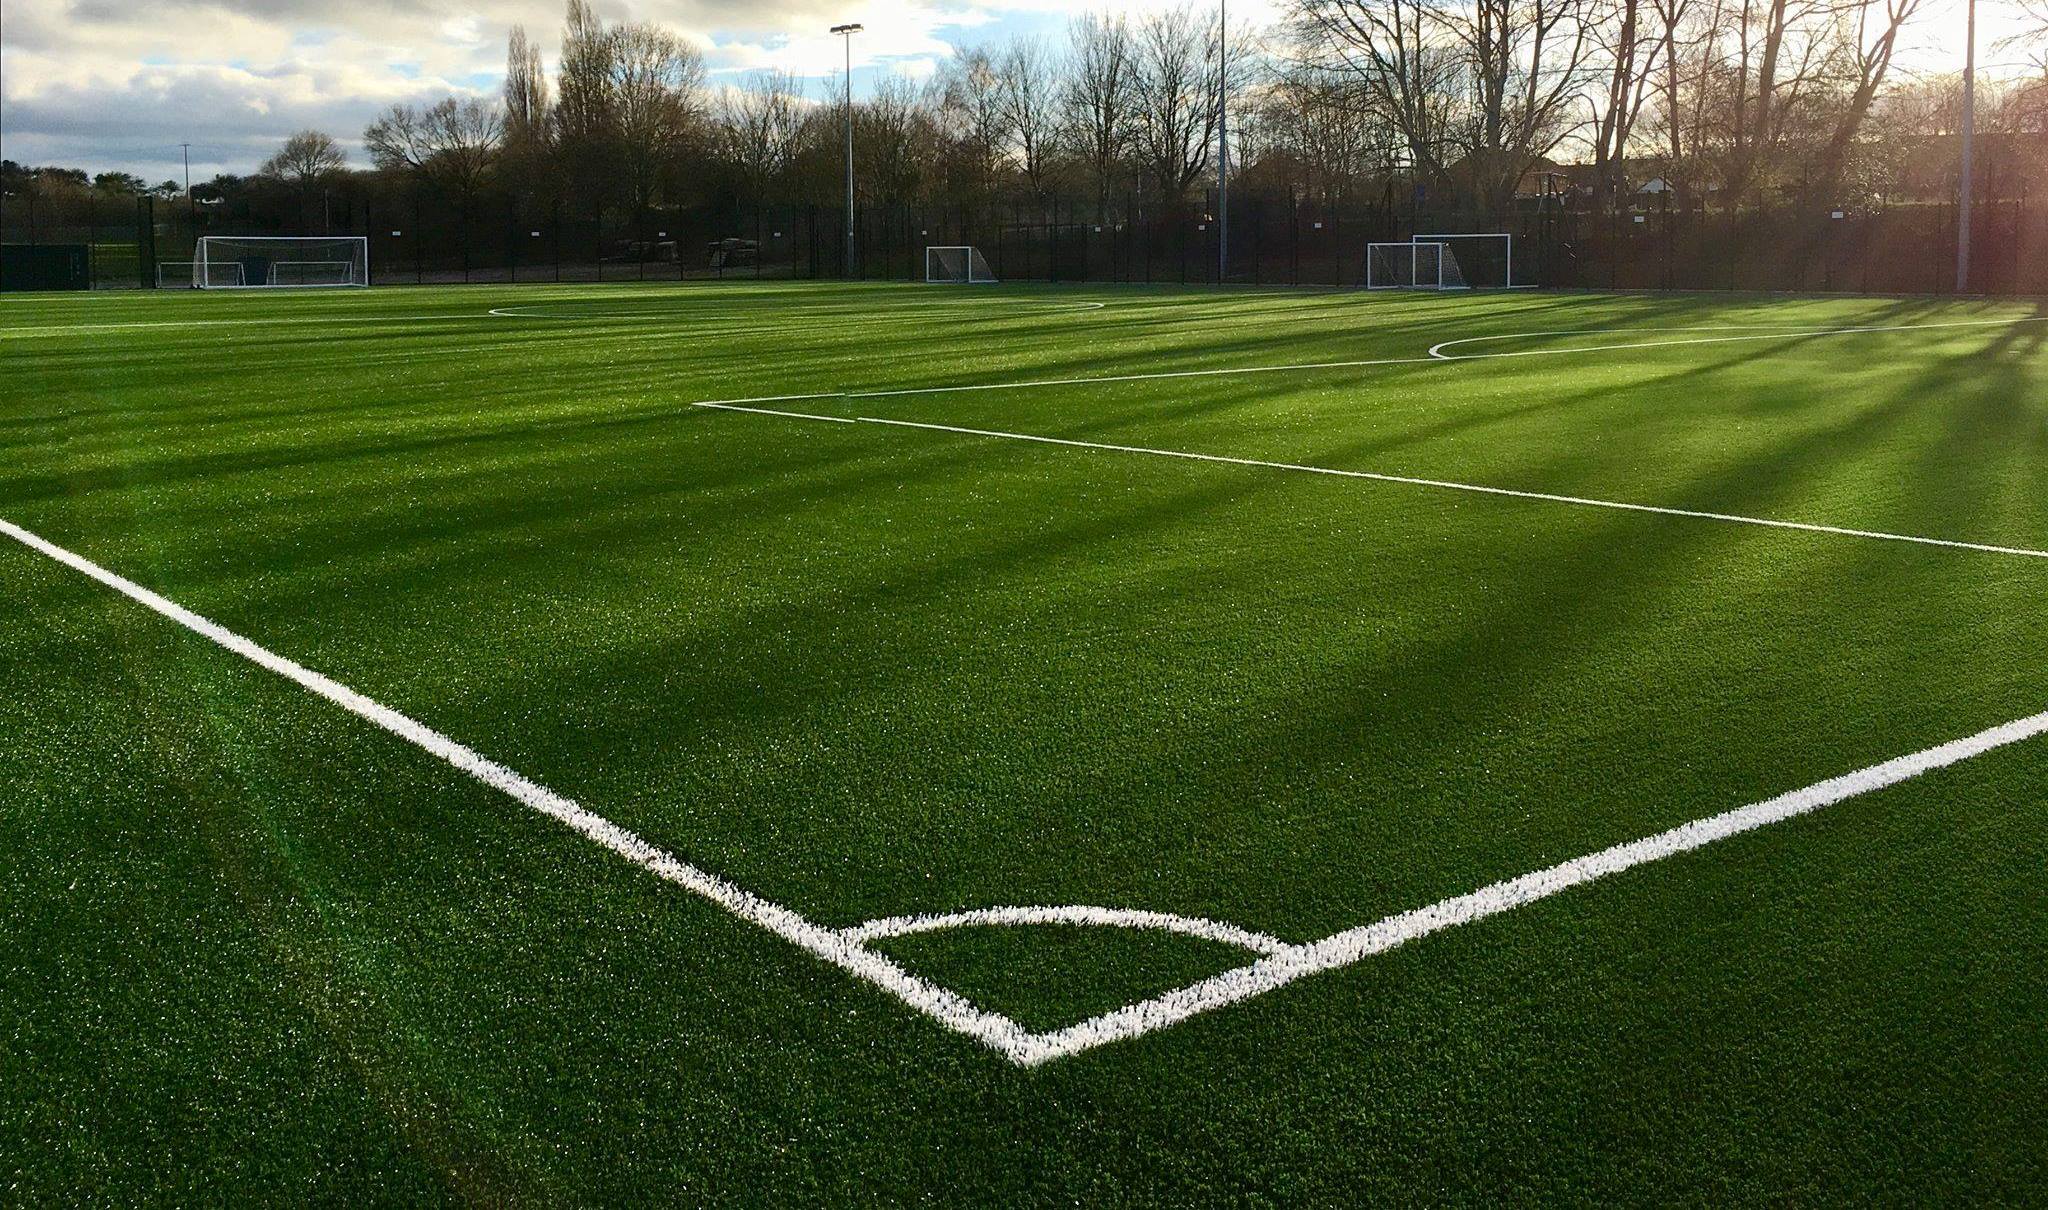 Works to Begin on Artificial Pitch - Herefordshire FA